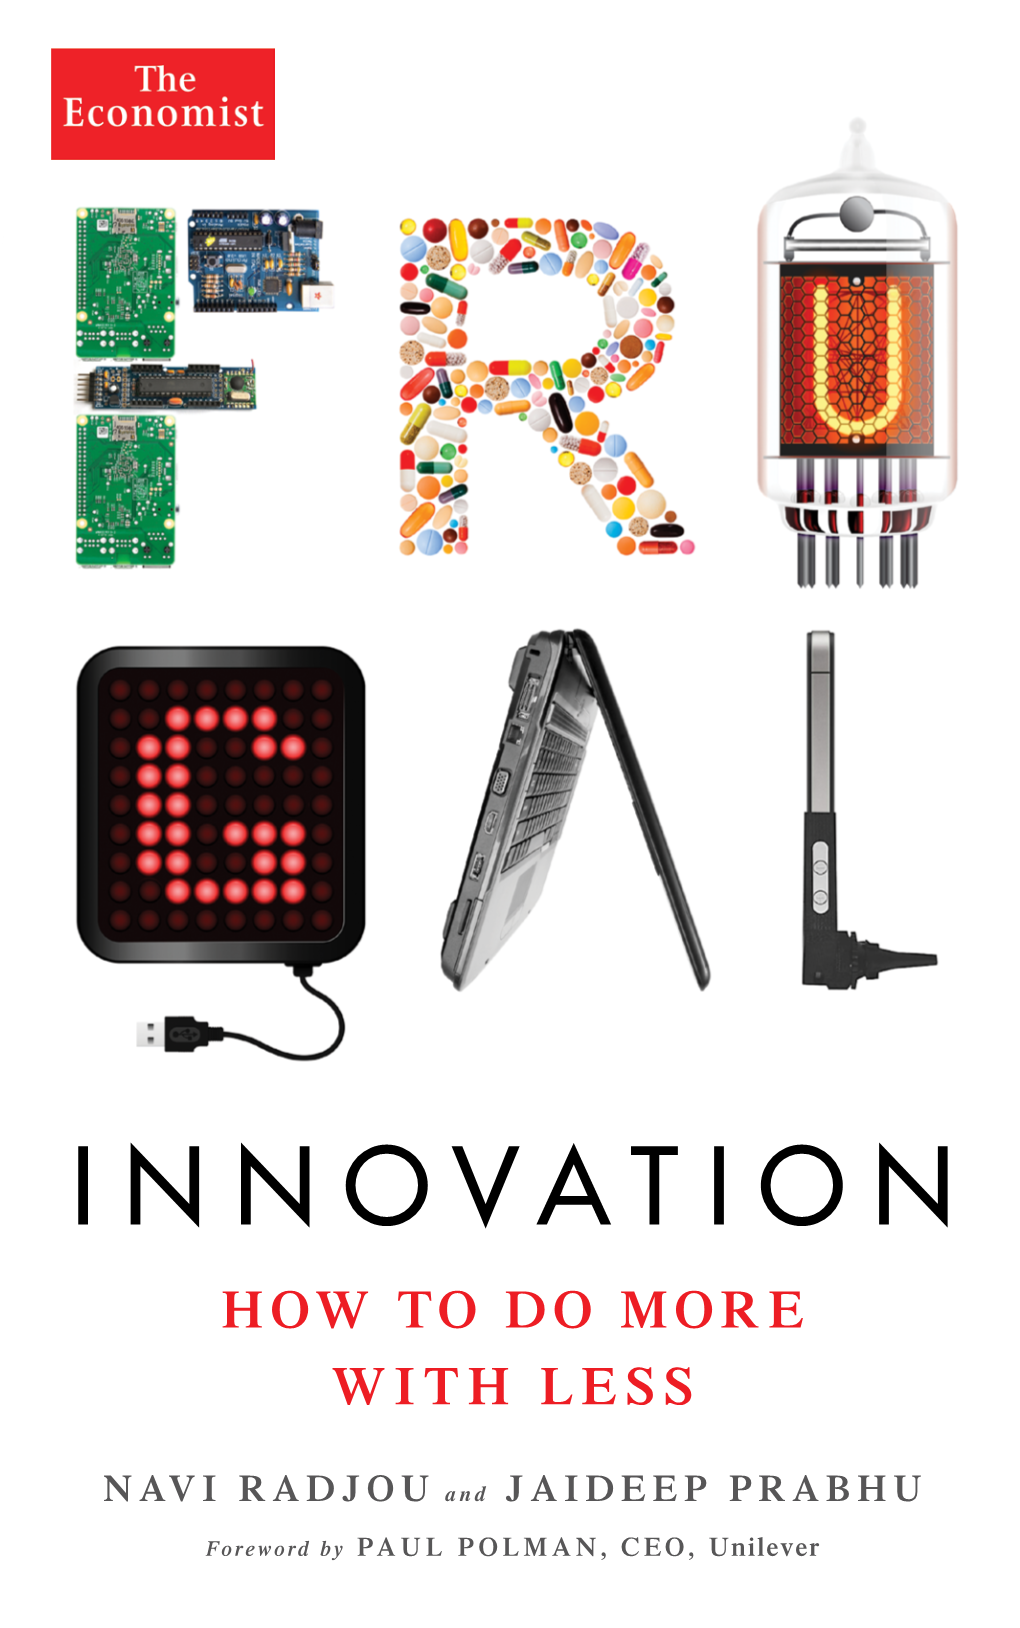 Frugal Innovation Allows Companies to Do Exactly That